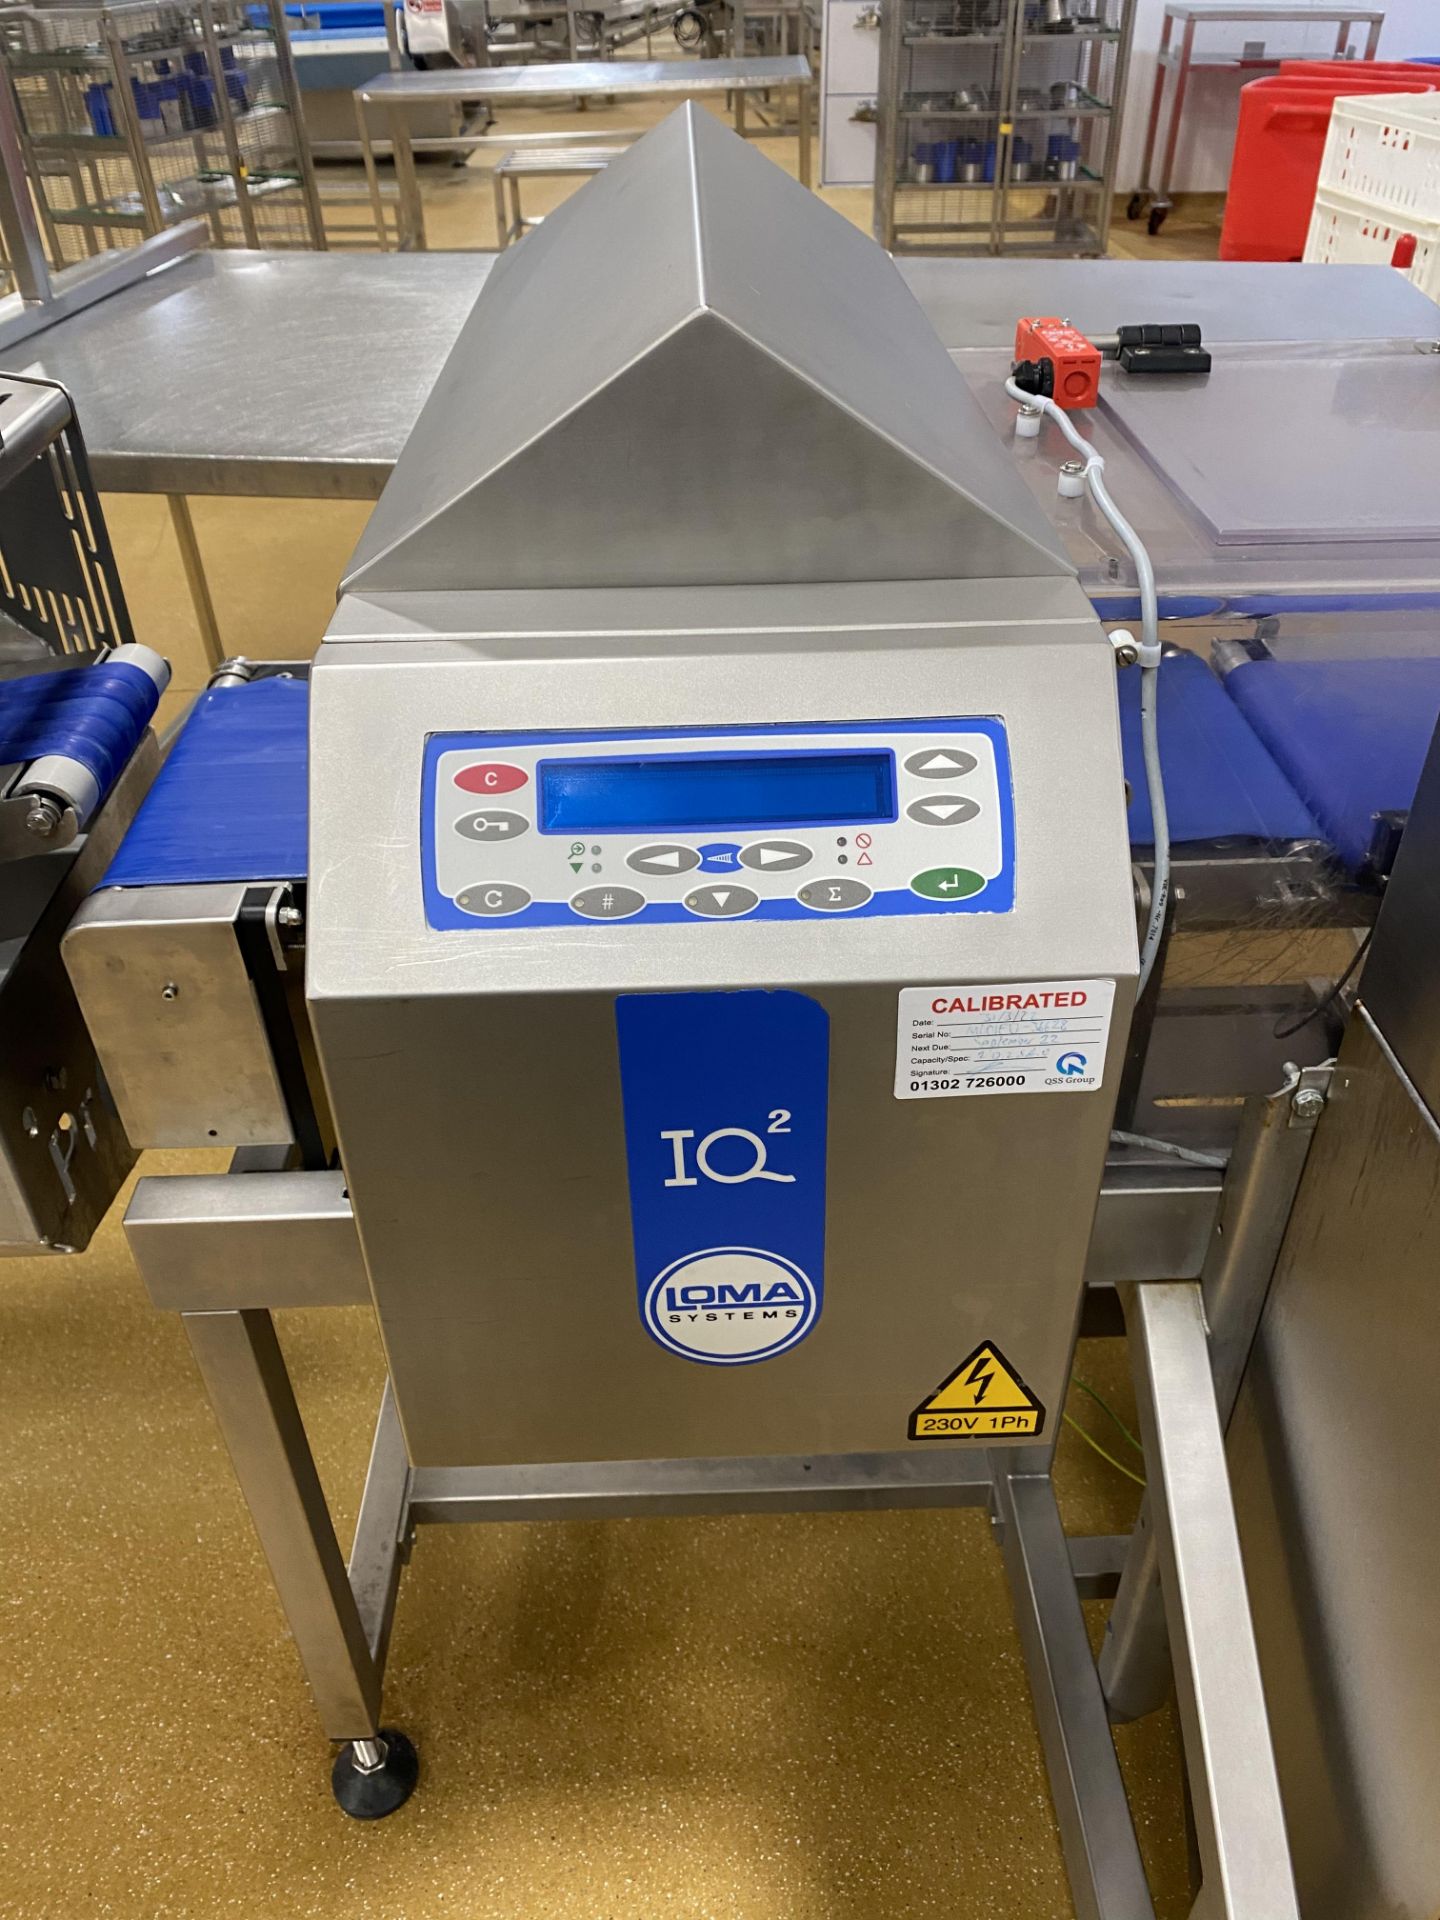 Loma IQ2 metal detector and checkweigher combi uni